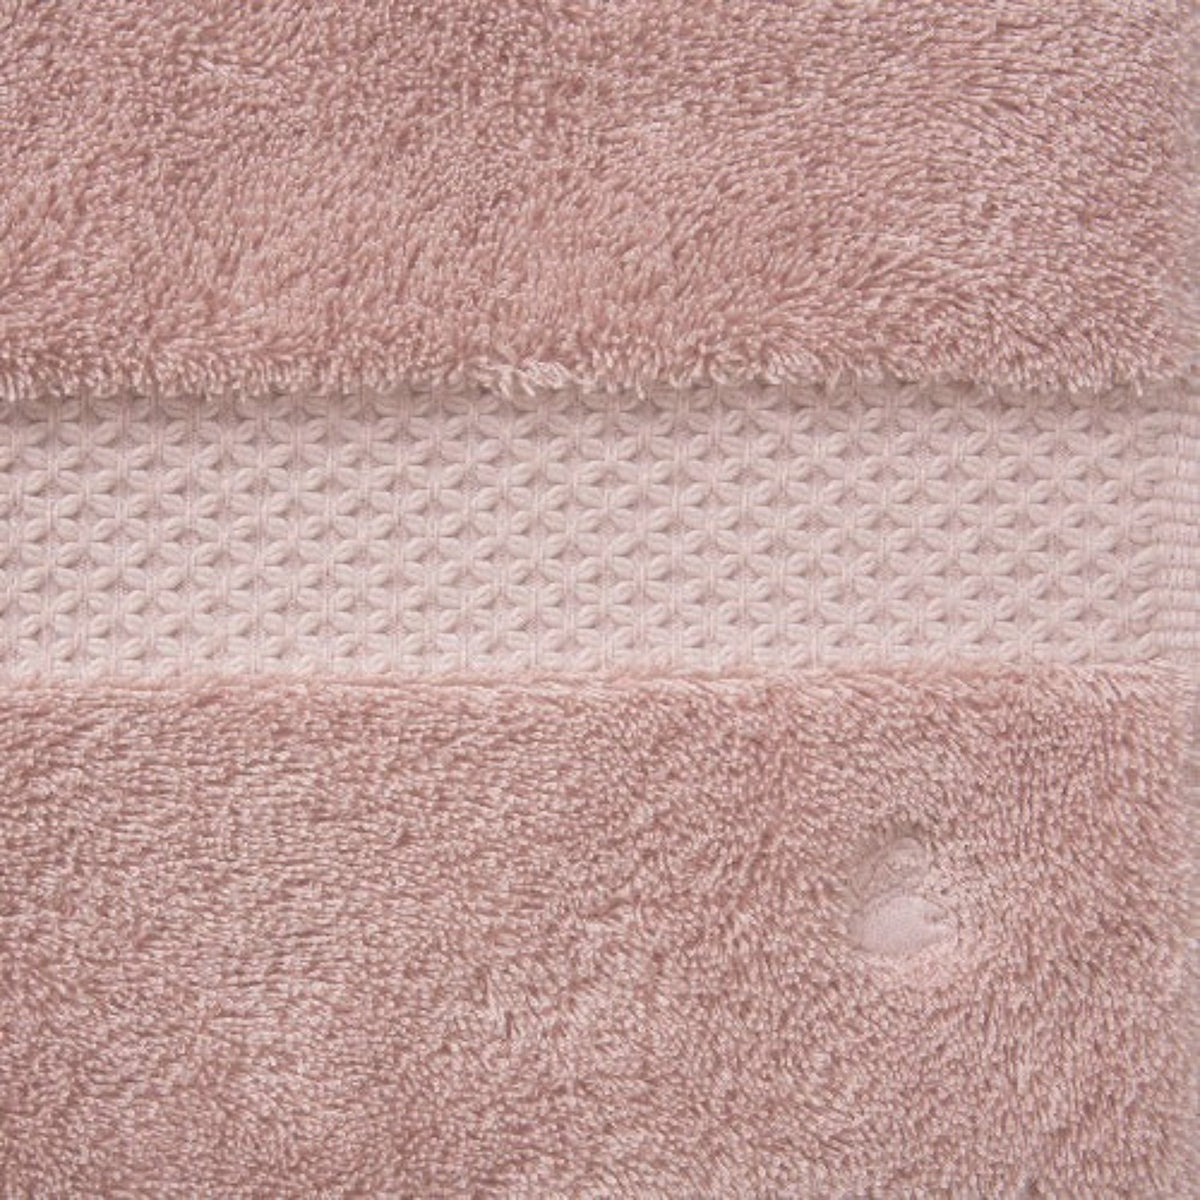 Yves Delorme Etoile Bath Towels and Mats Swatch The Rose Fine Linens